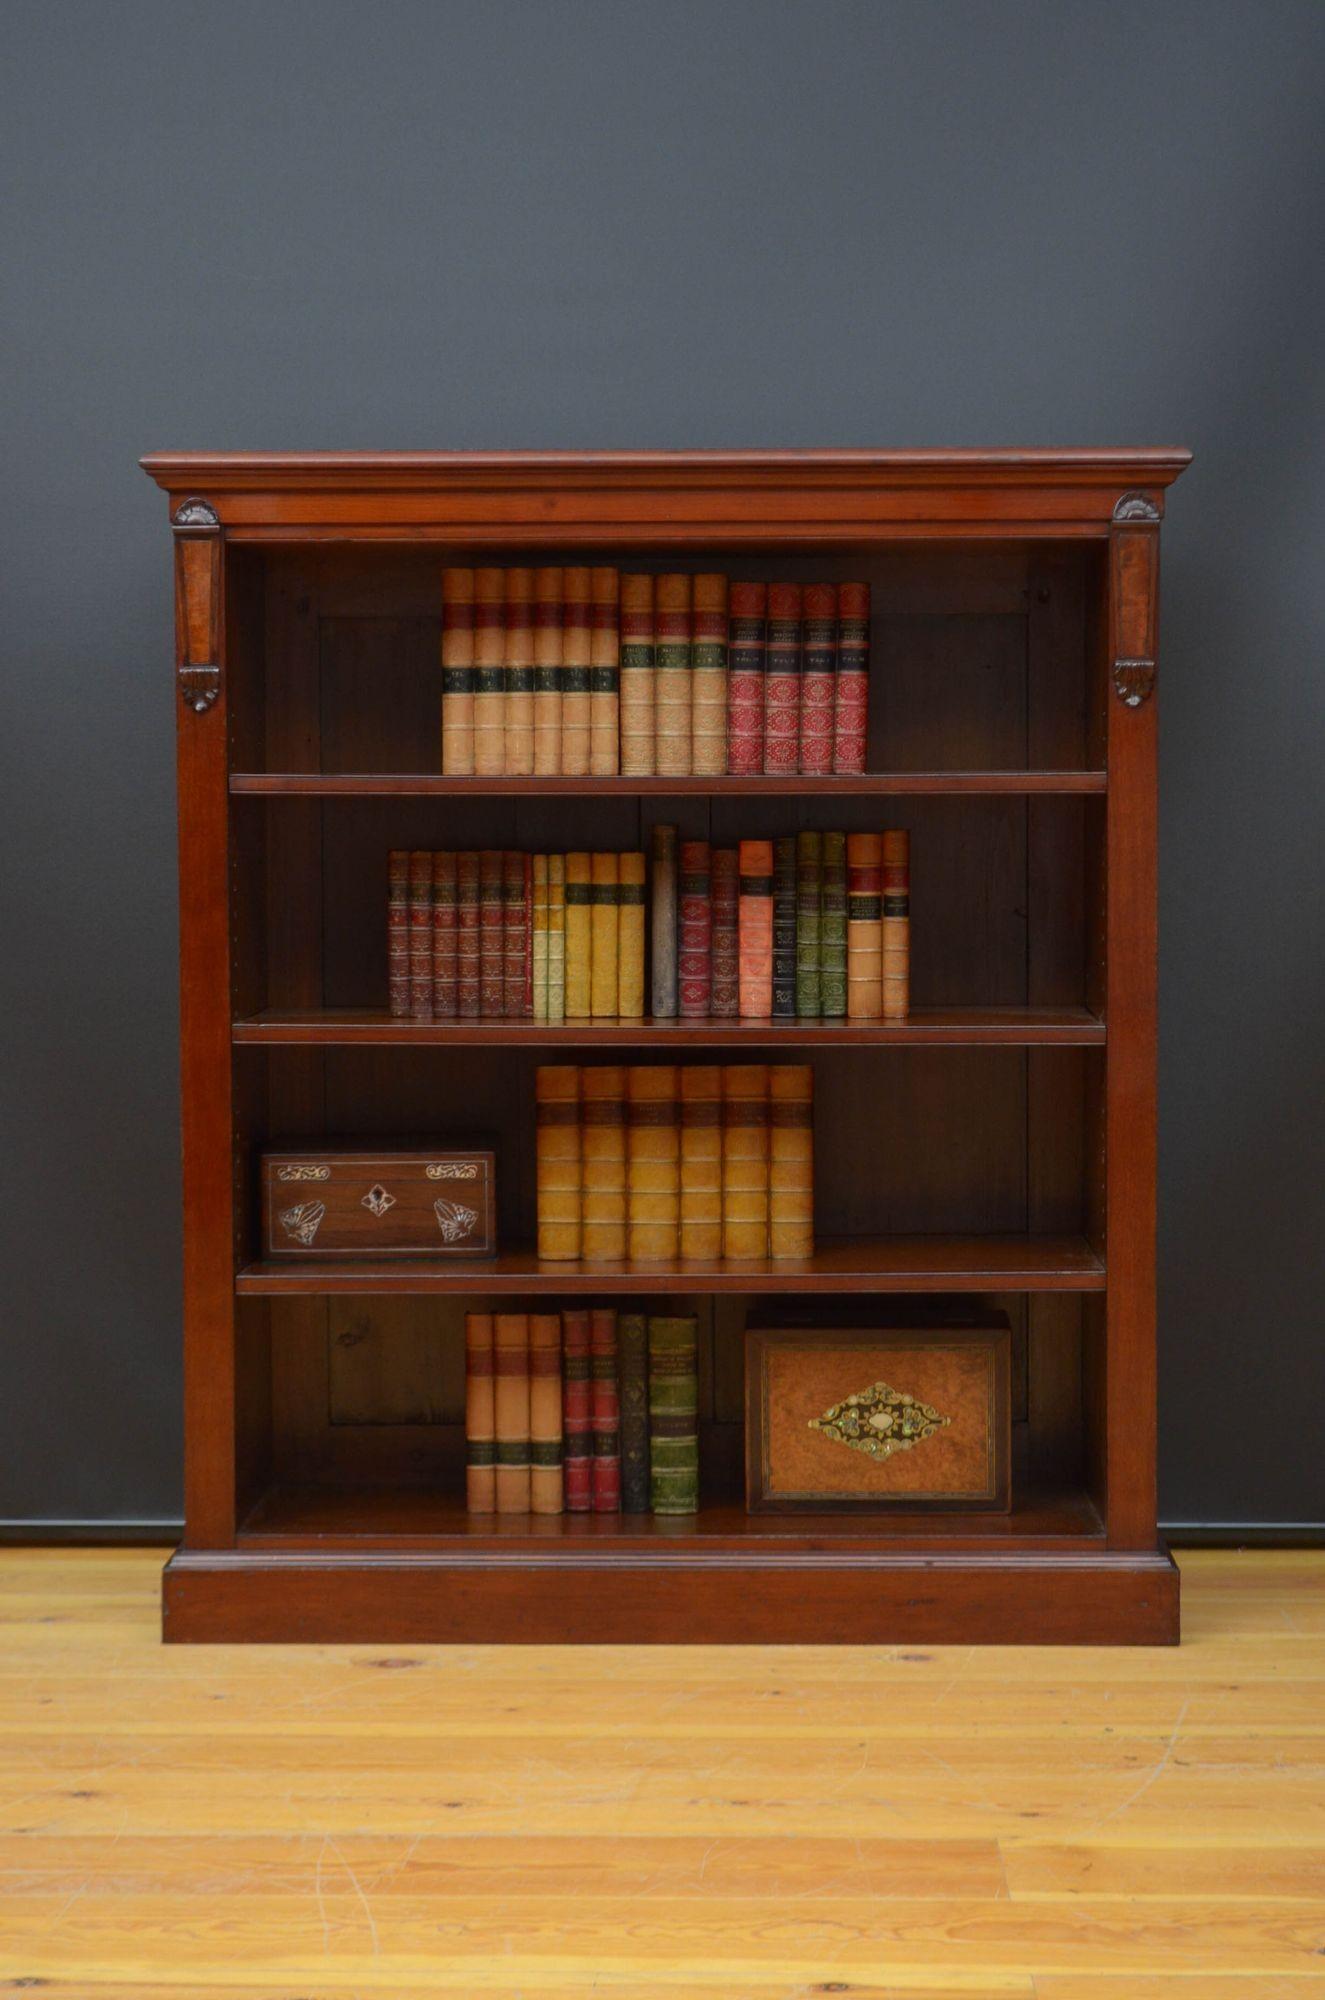 Sn5464 Fine quality Victorian figured mahogany open bookcase, having well figured oversailing top with moulded edge above a shallow frieze and three height adjustable shelves all flanked by drop carvings, all standing on plinth base. This antique